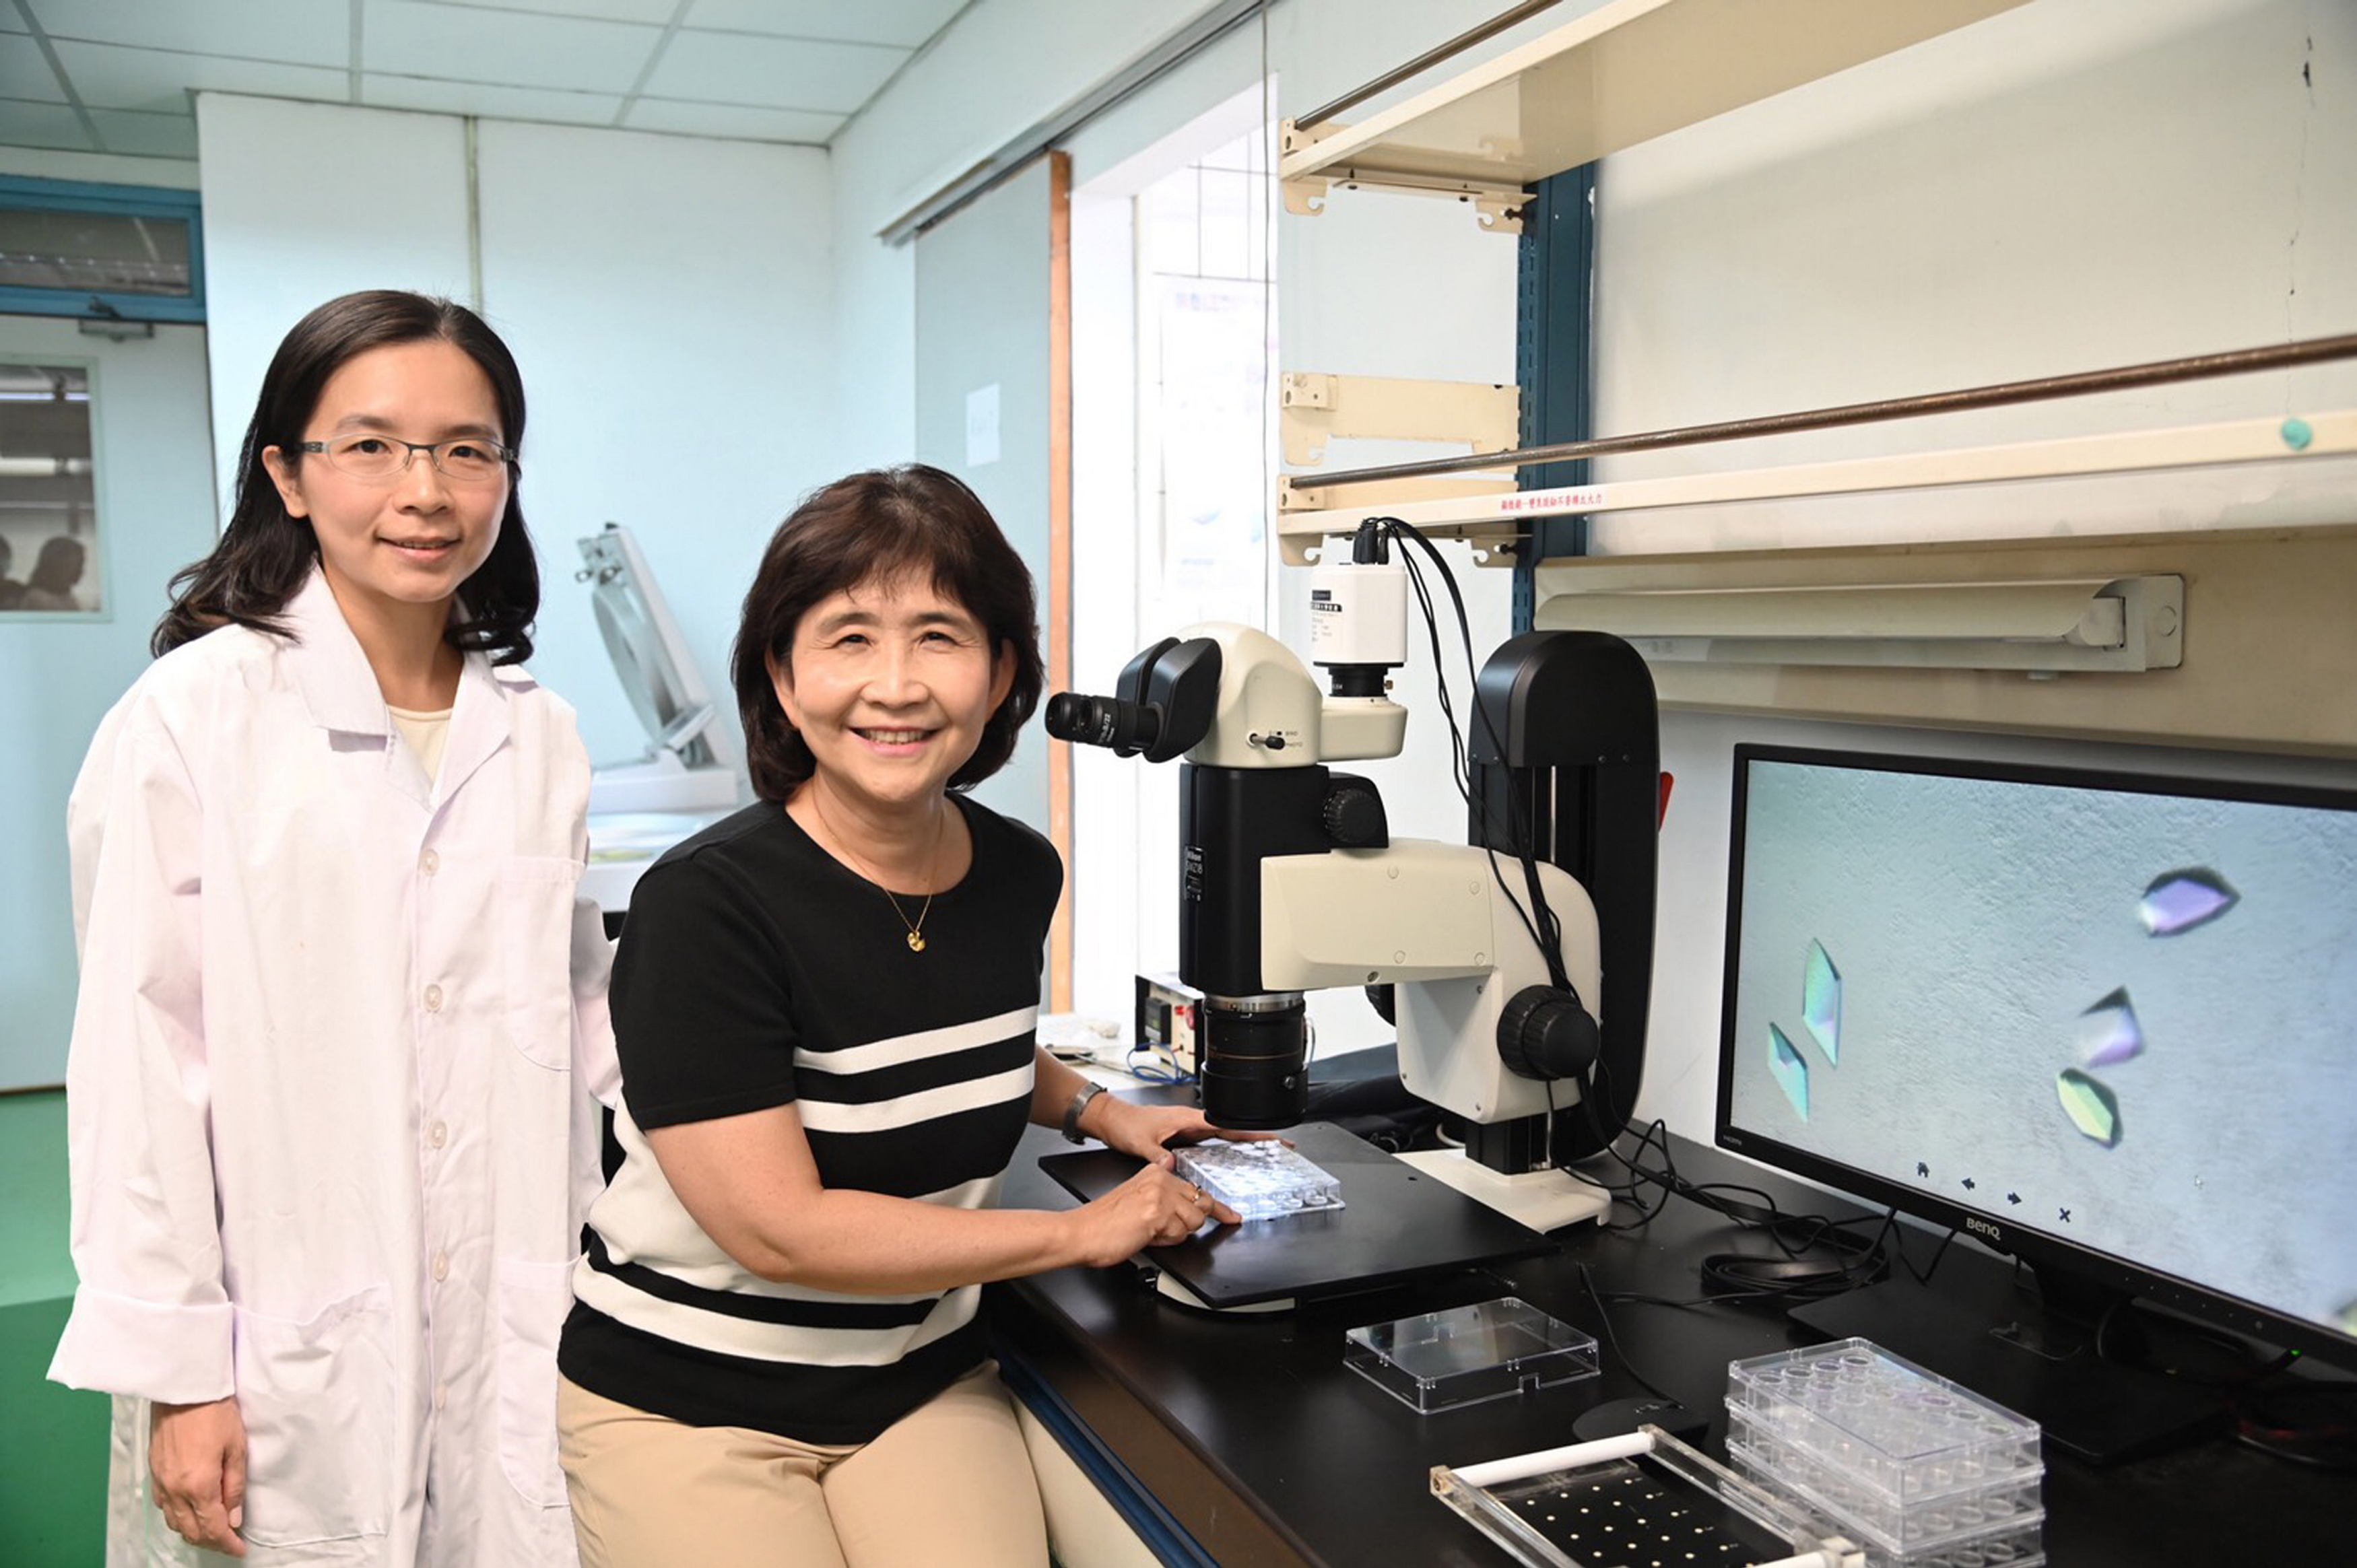 NTHU’s research team gives hope to improving dementia treatment